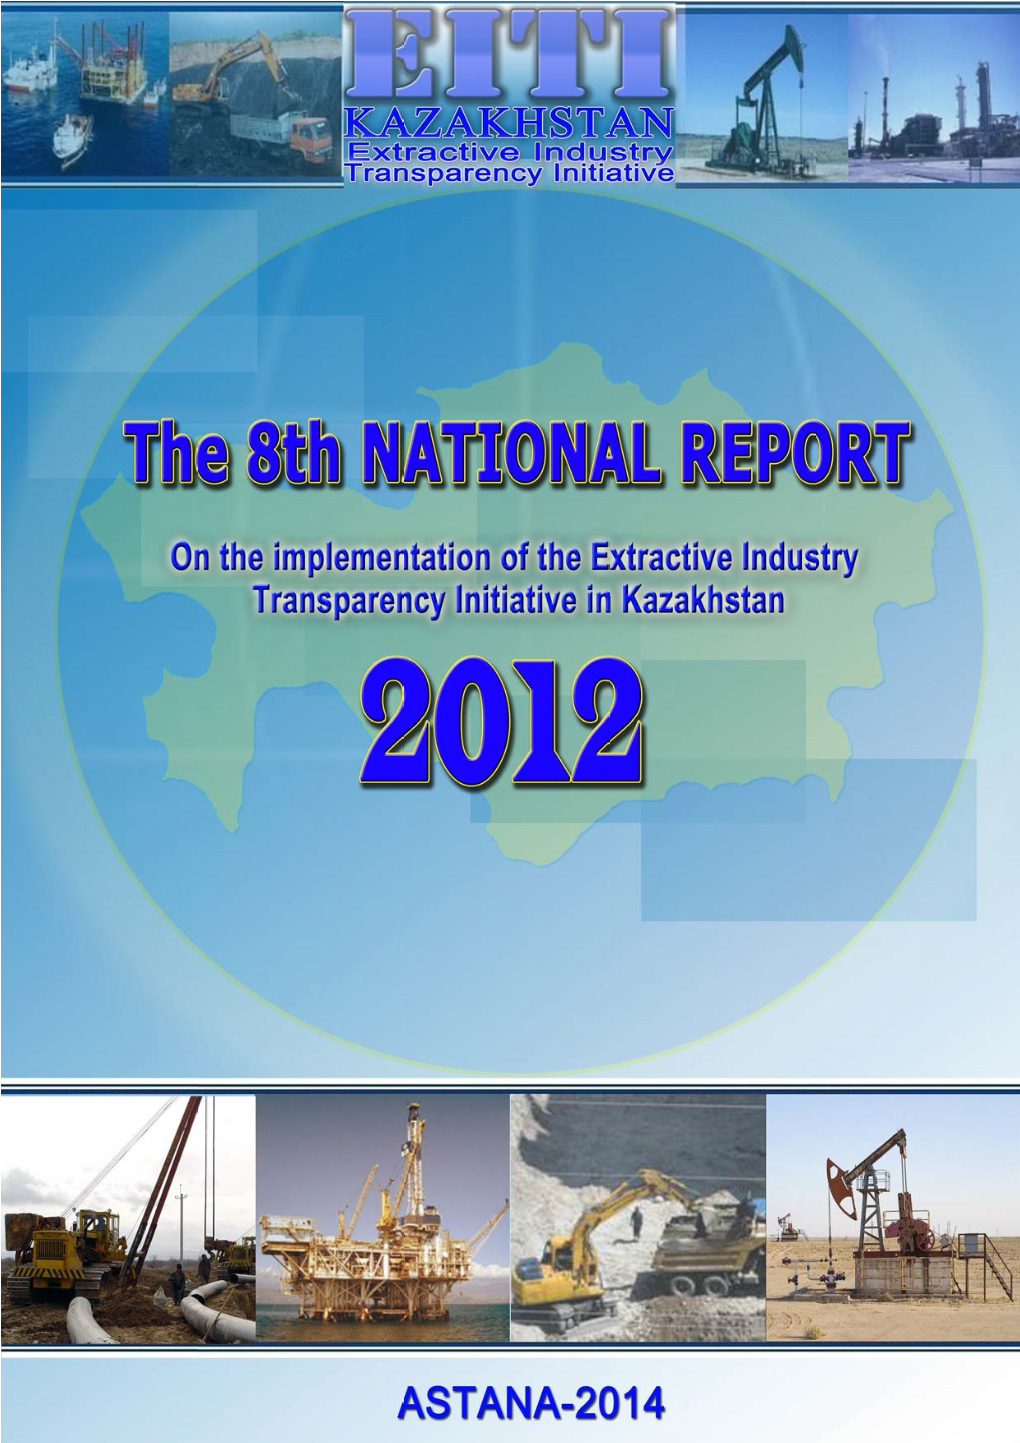 The 8Th NATIONAL REPORT on Implementation of the Extractive